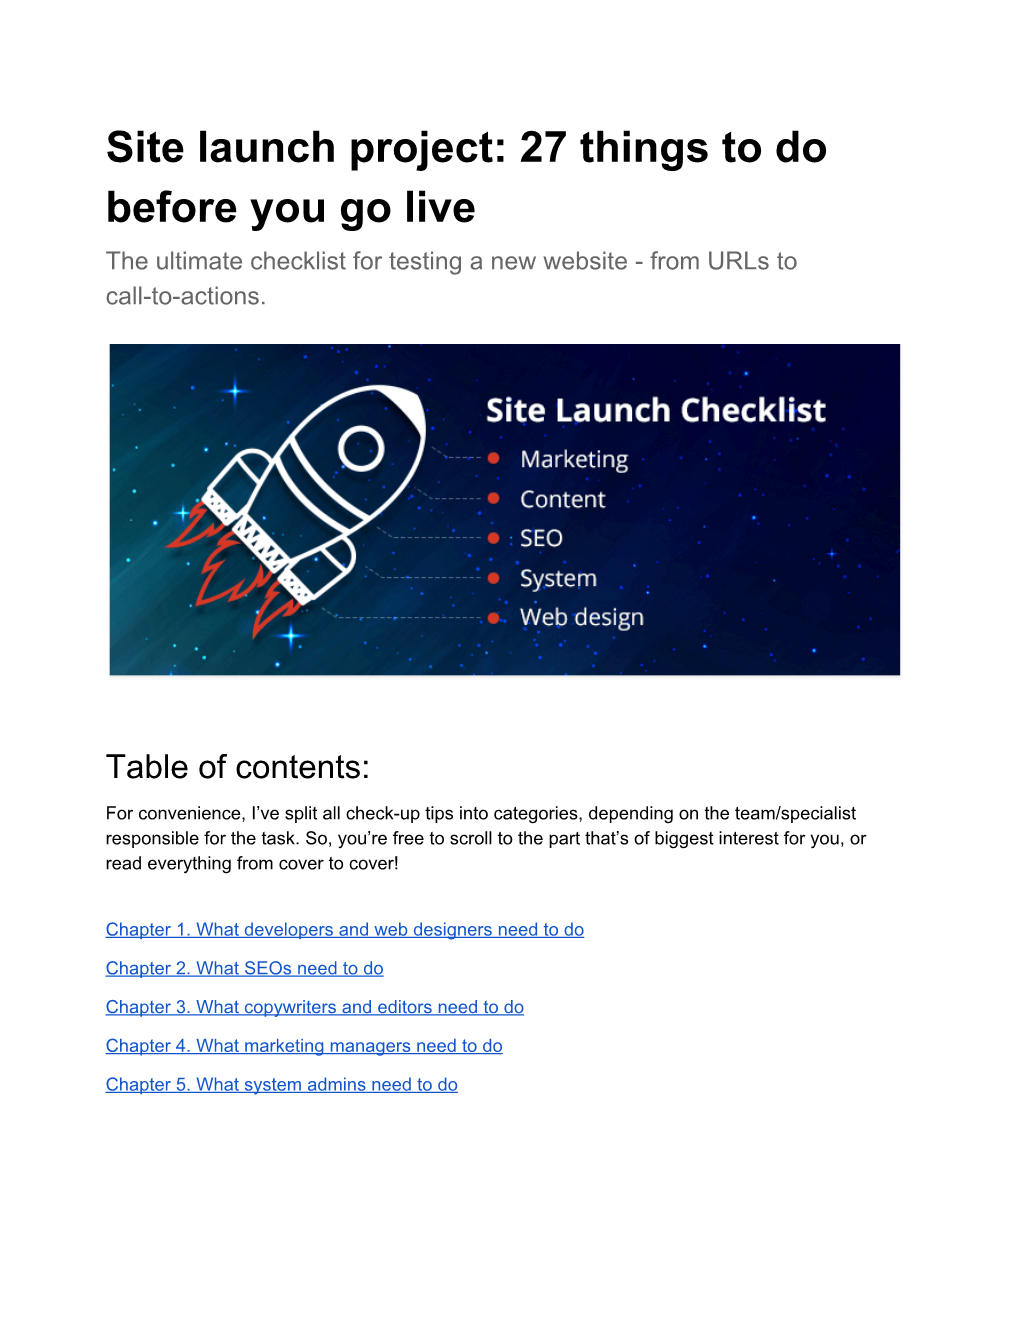 Site Launch Project: 27 Things to Do Before You Go Live the Ultimate Checklist for Testing a New Website - from Urls to Call-To-Actions